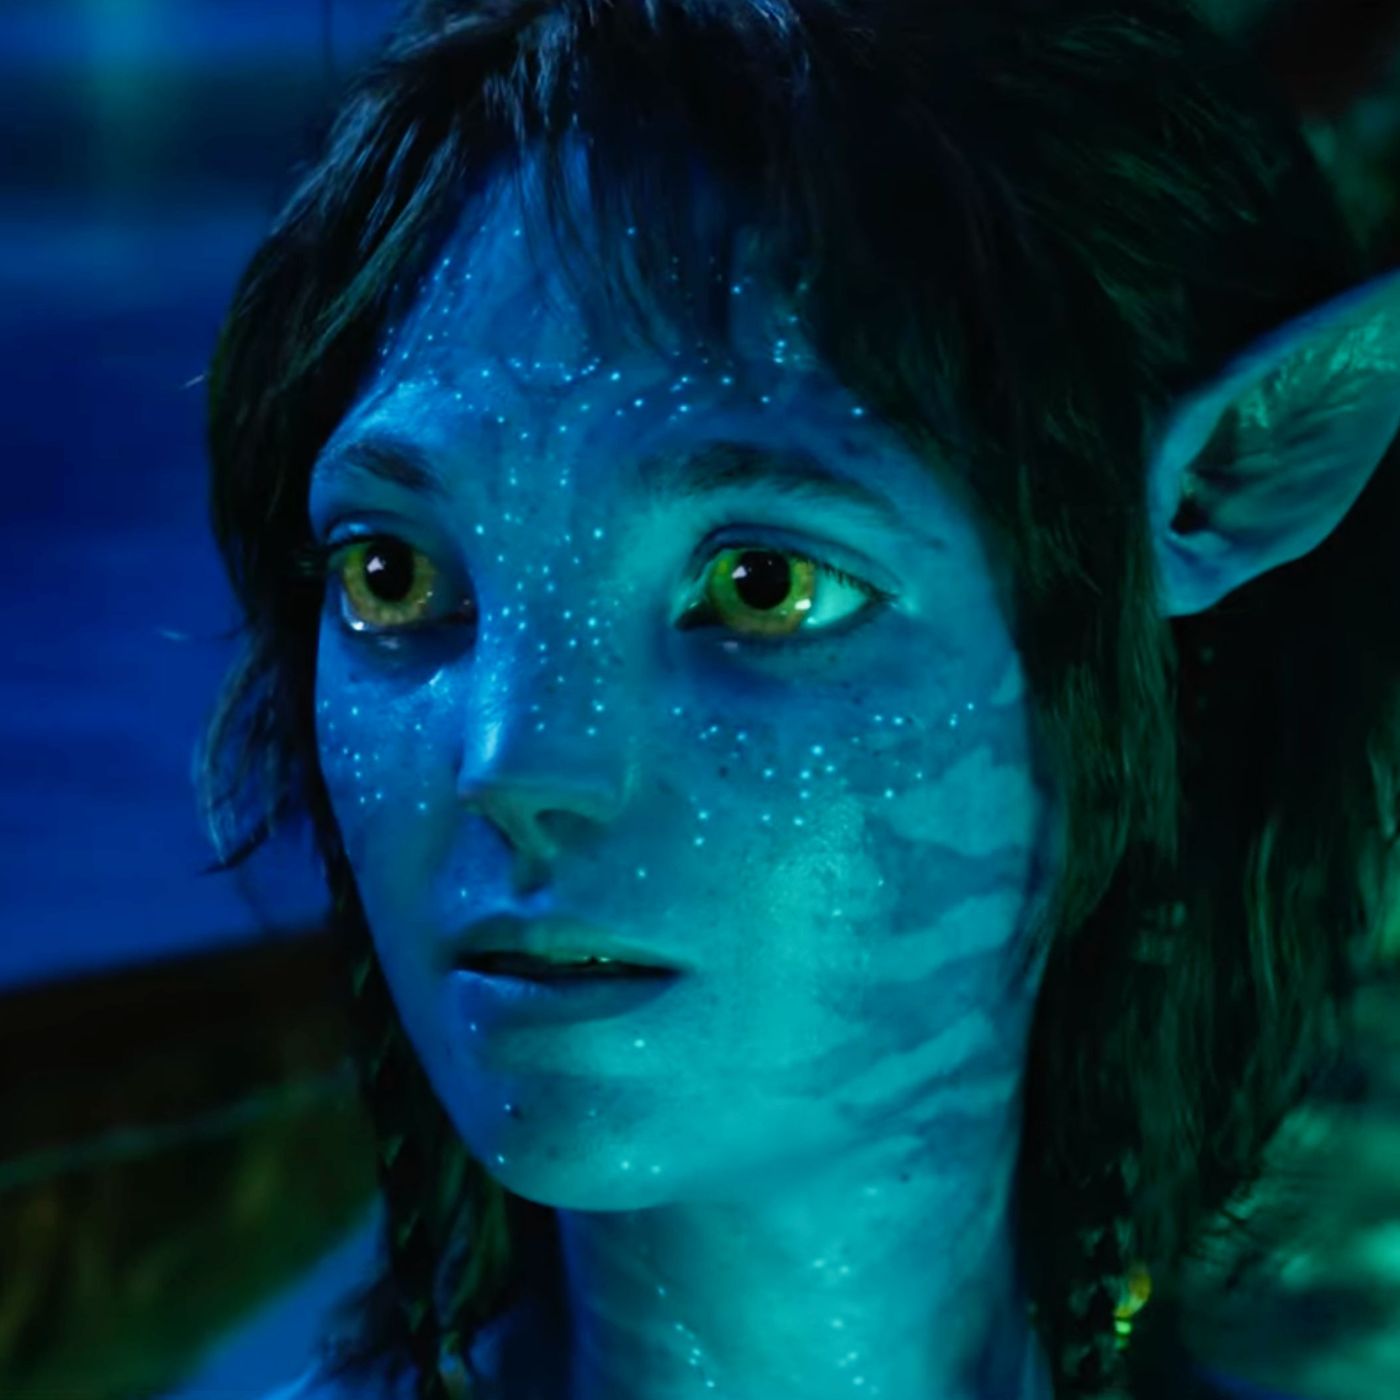 Avatar 2' Trailer, Release Date, and Everything We Know